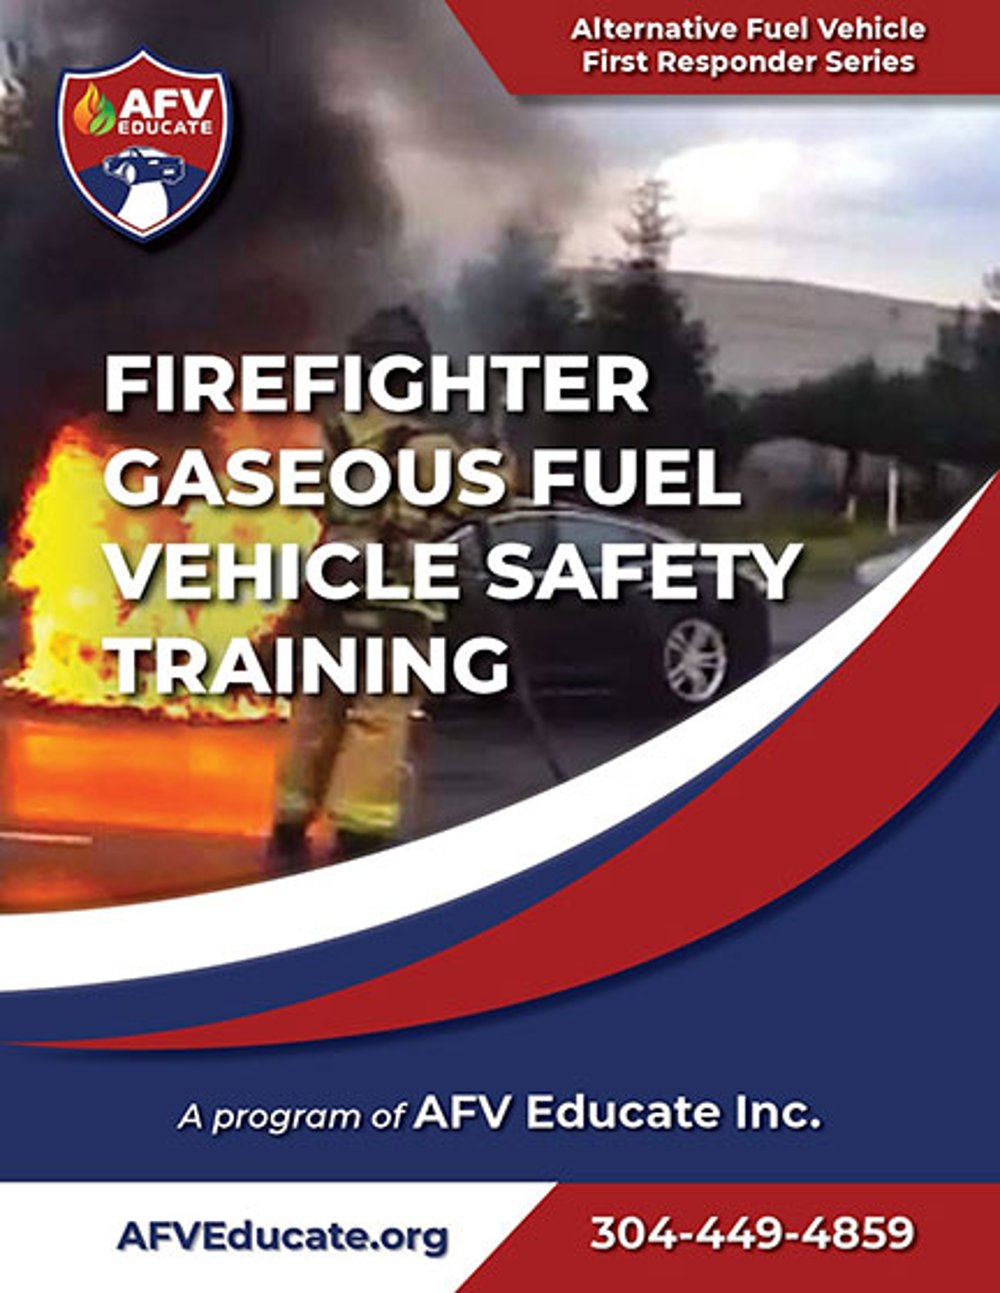 AFV Educate Firefighter Gaseous Fuel Vehicle Safety Training Manual